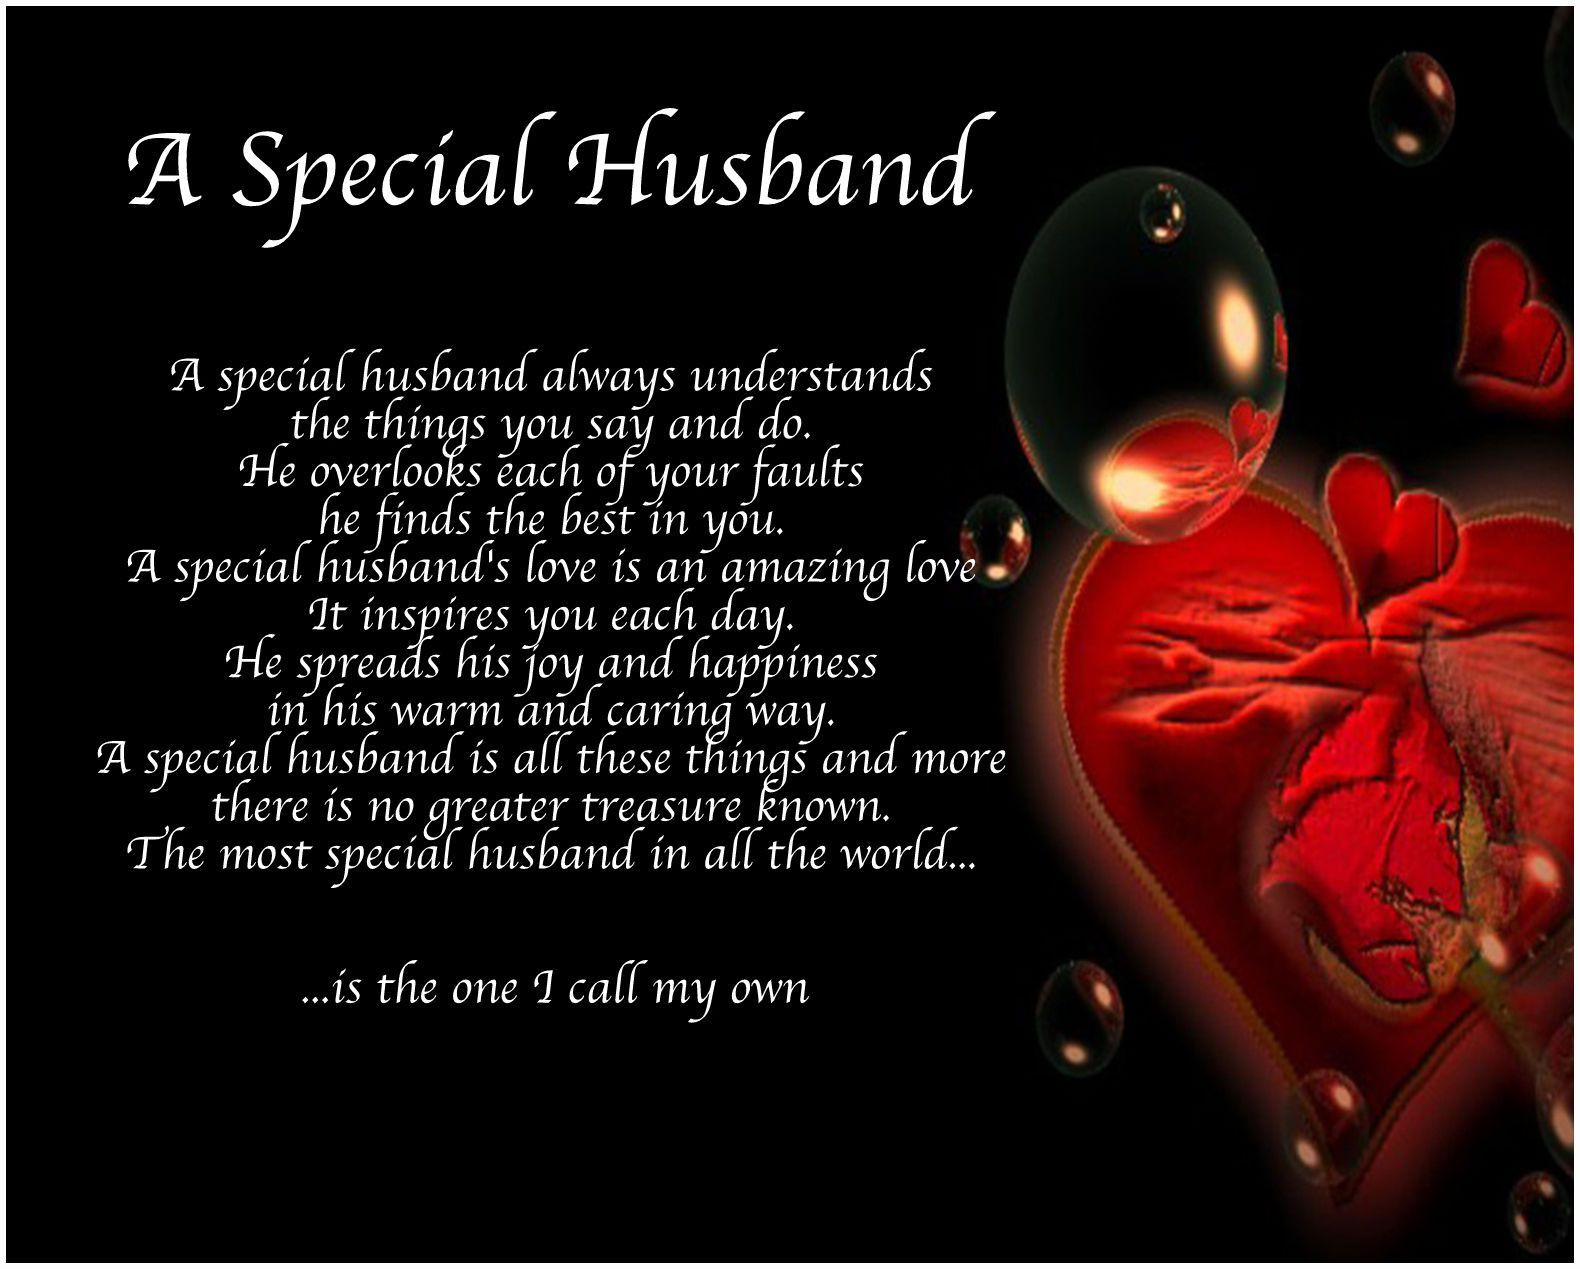 Happy Valentines Day Husband Quotes
 Personalised A Special Husband Poem Valentines Birthday